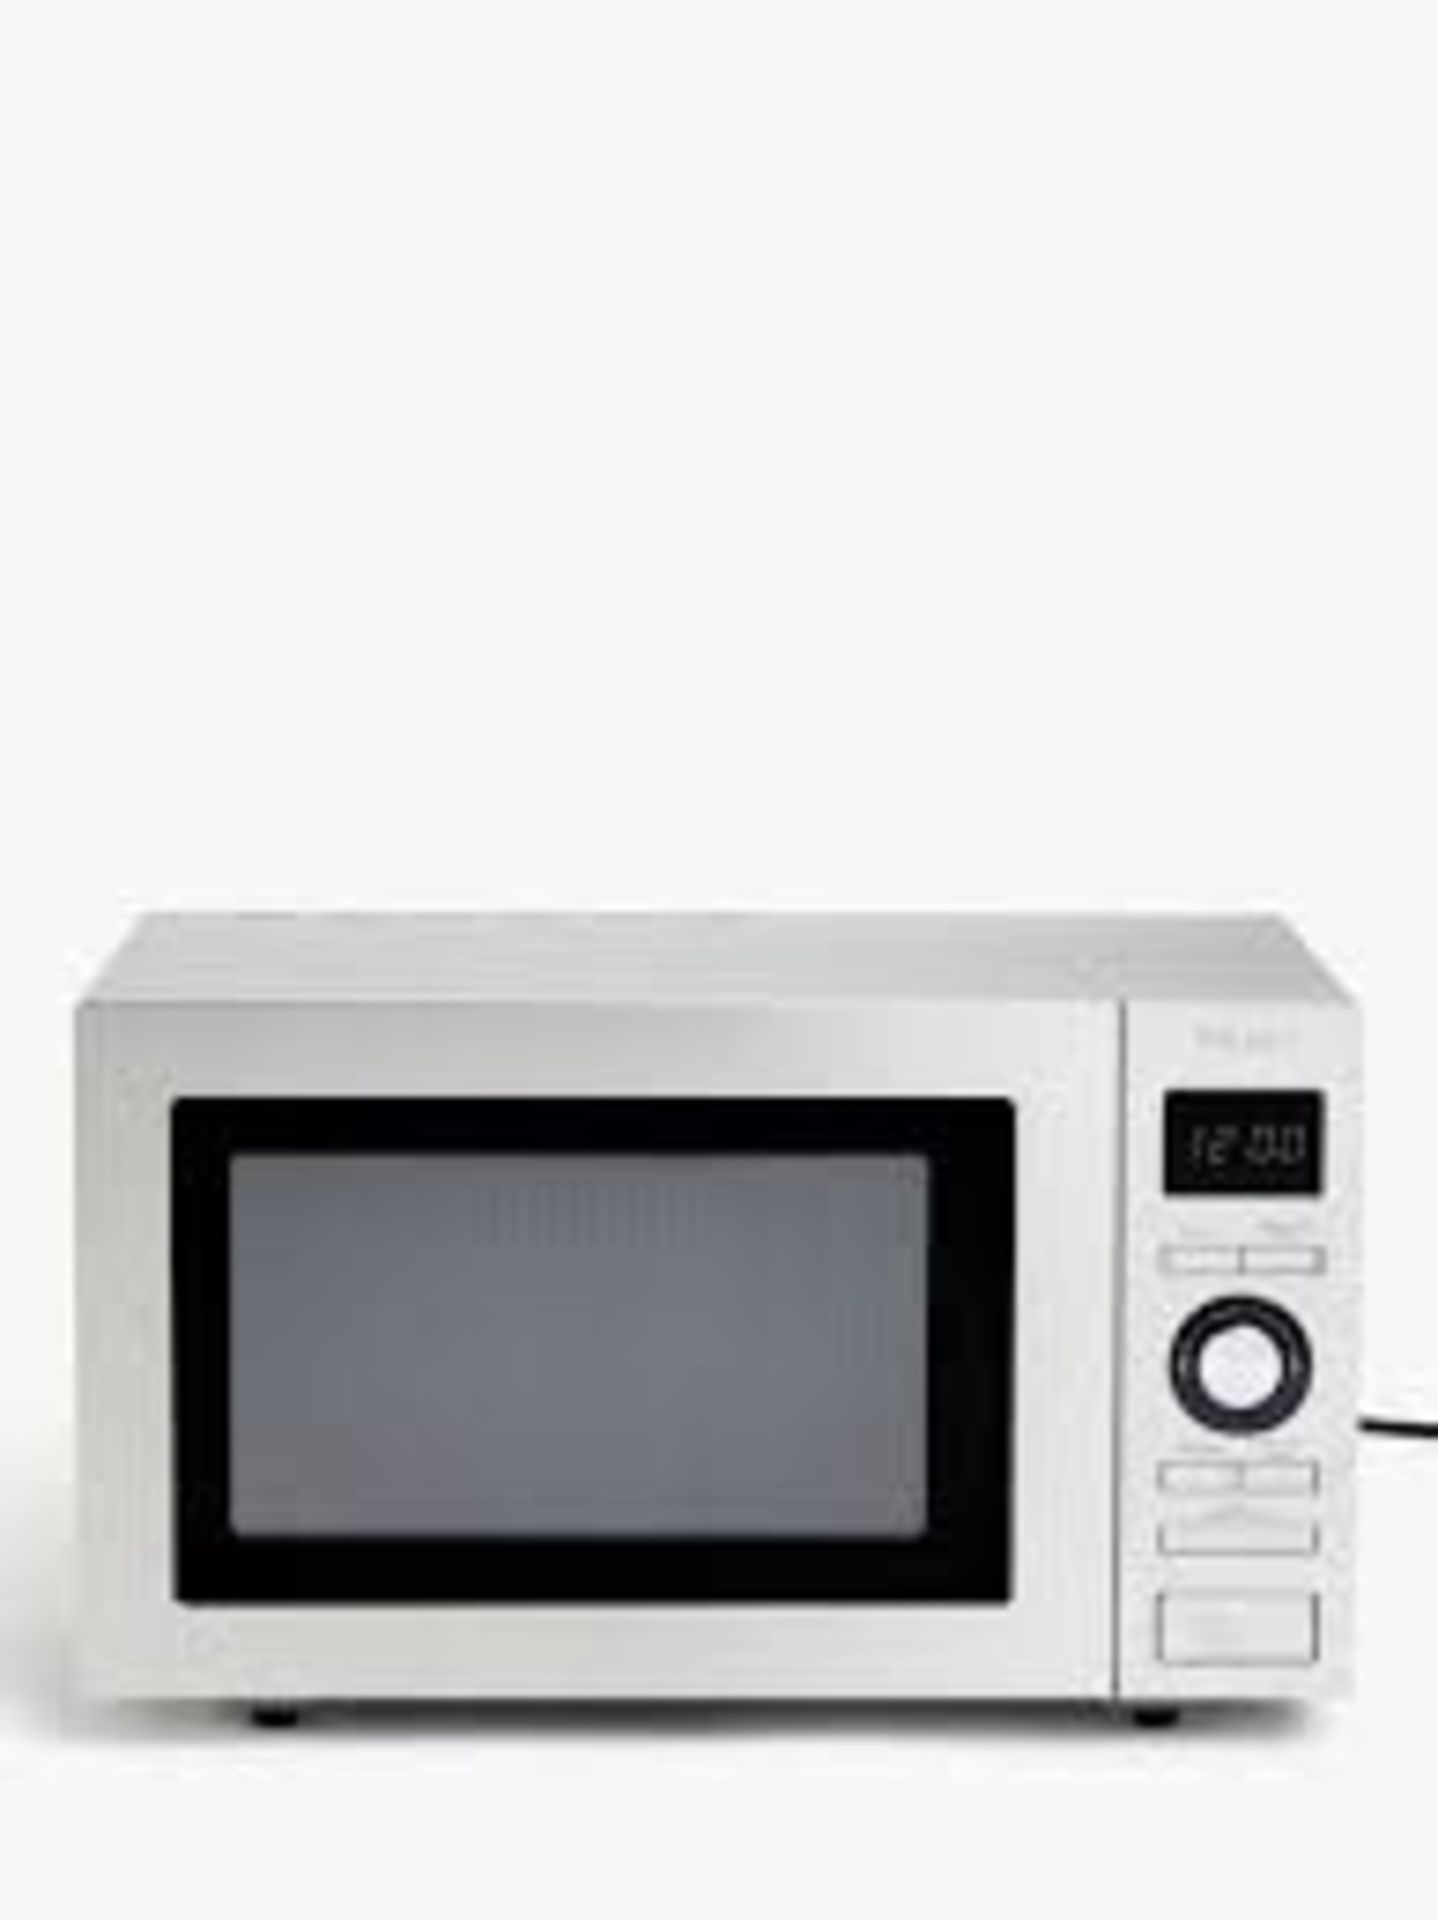 John Lewis JLSMWO09 25 Litre Microwave. - P4. A 25L capacity, 8 power levels, auto defrost and